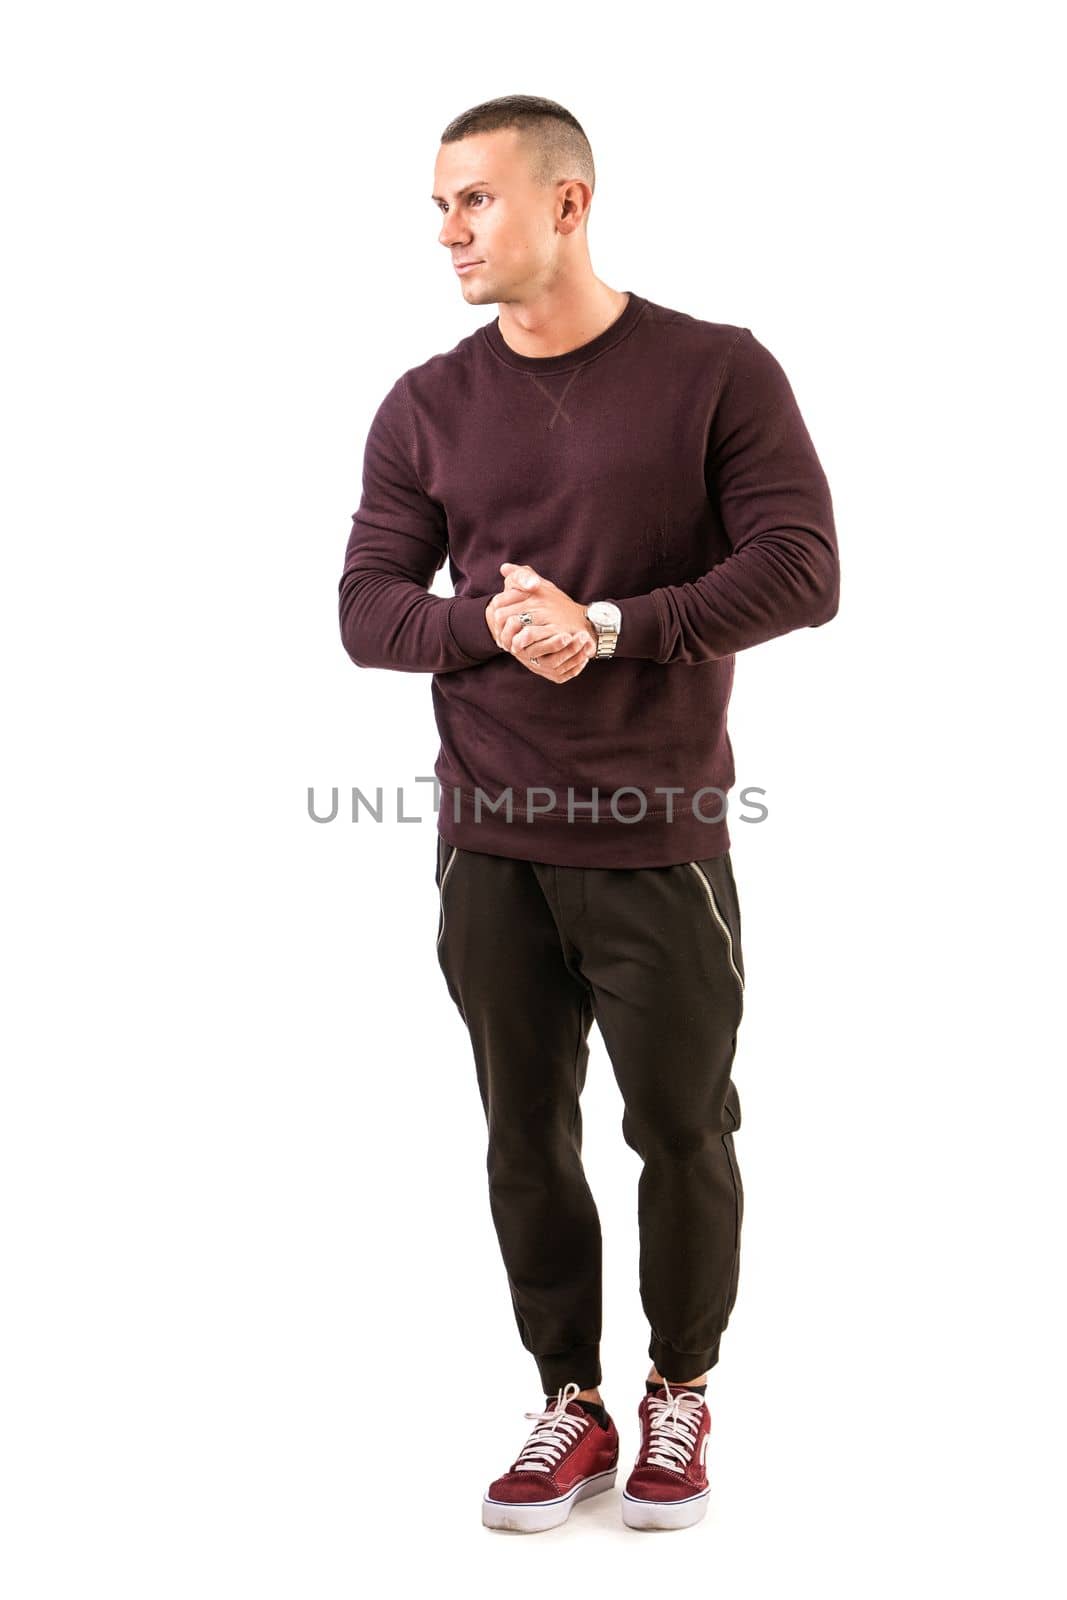 Handsome young man standing with dark shirt by artofphoto